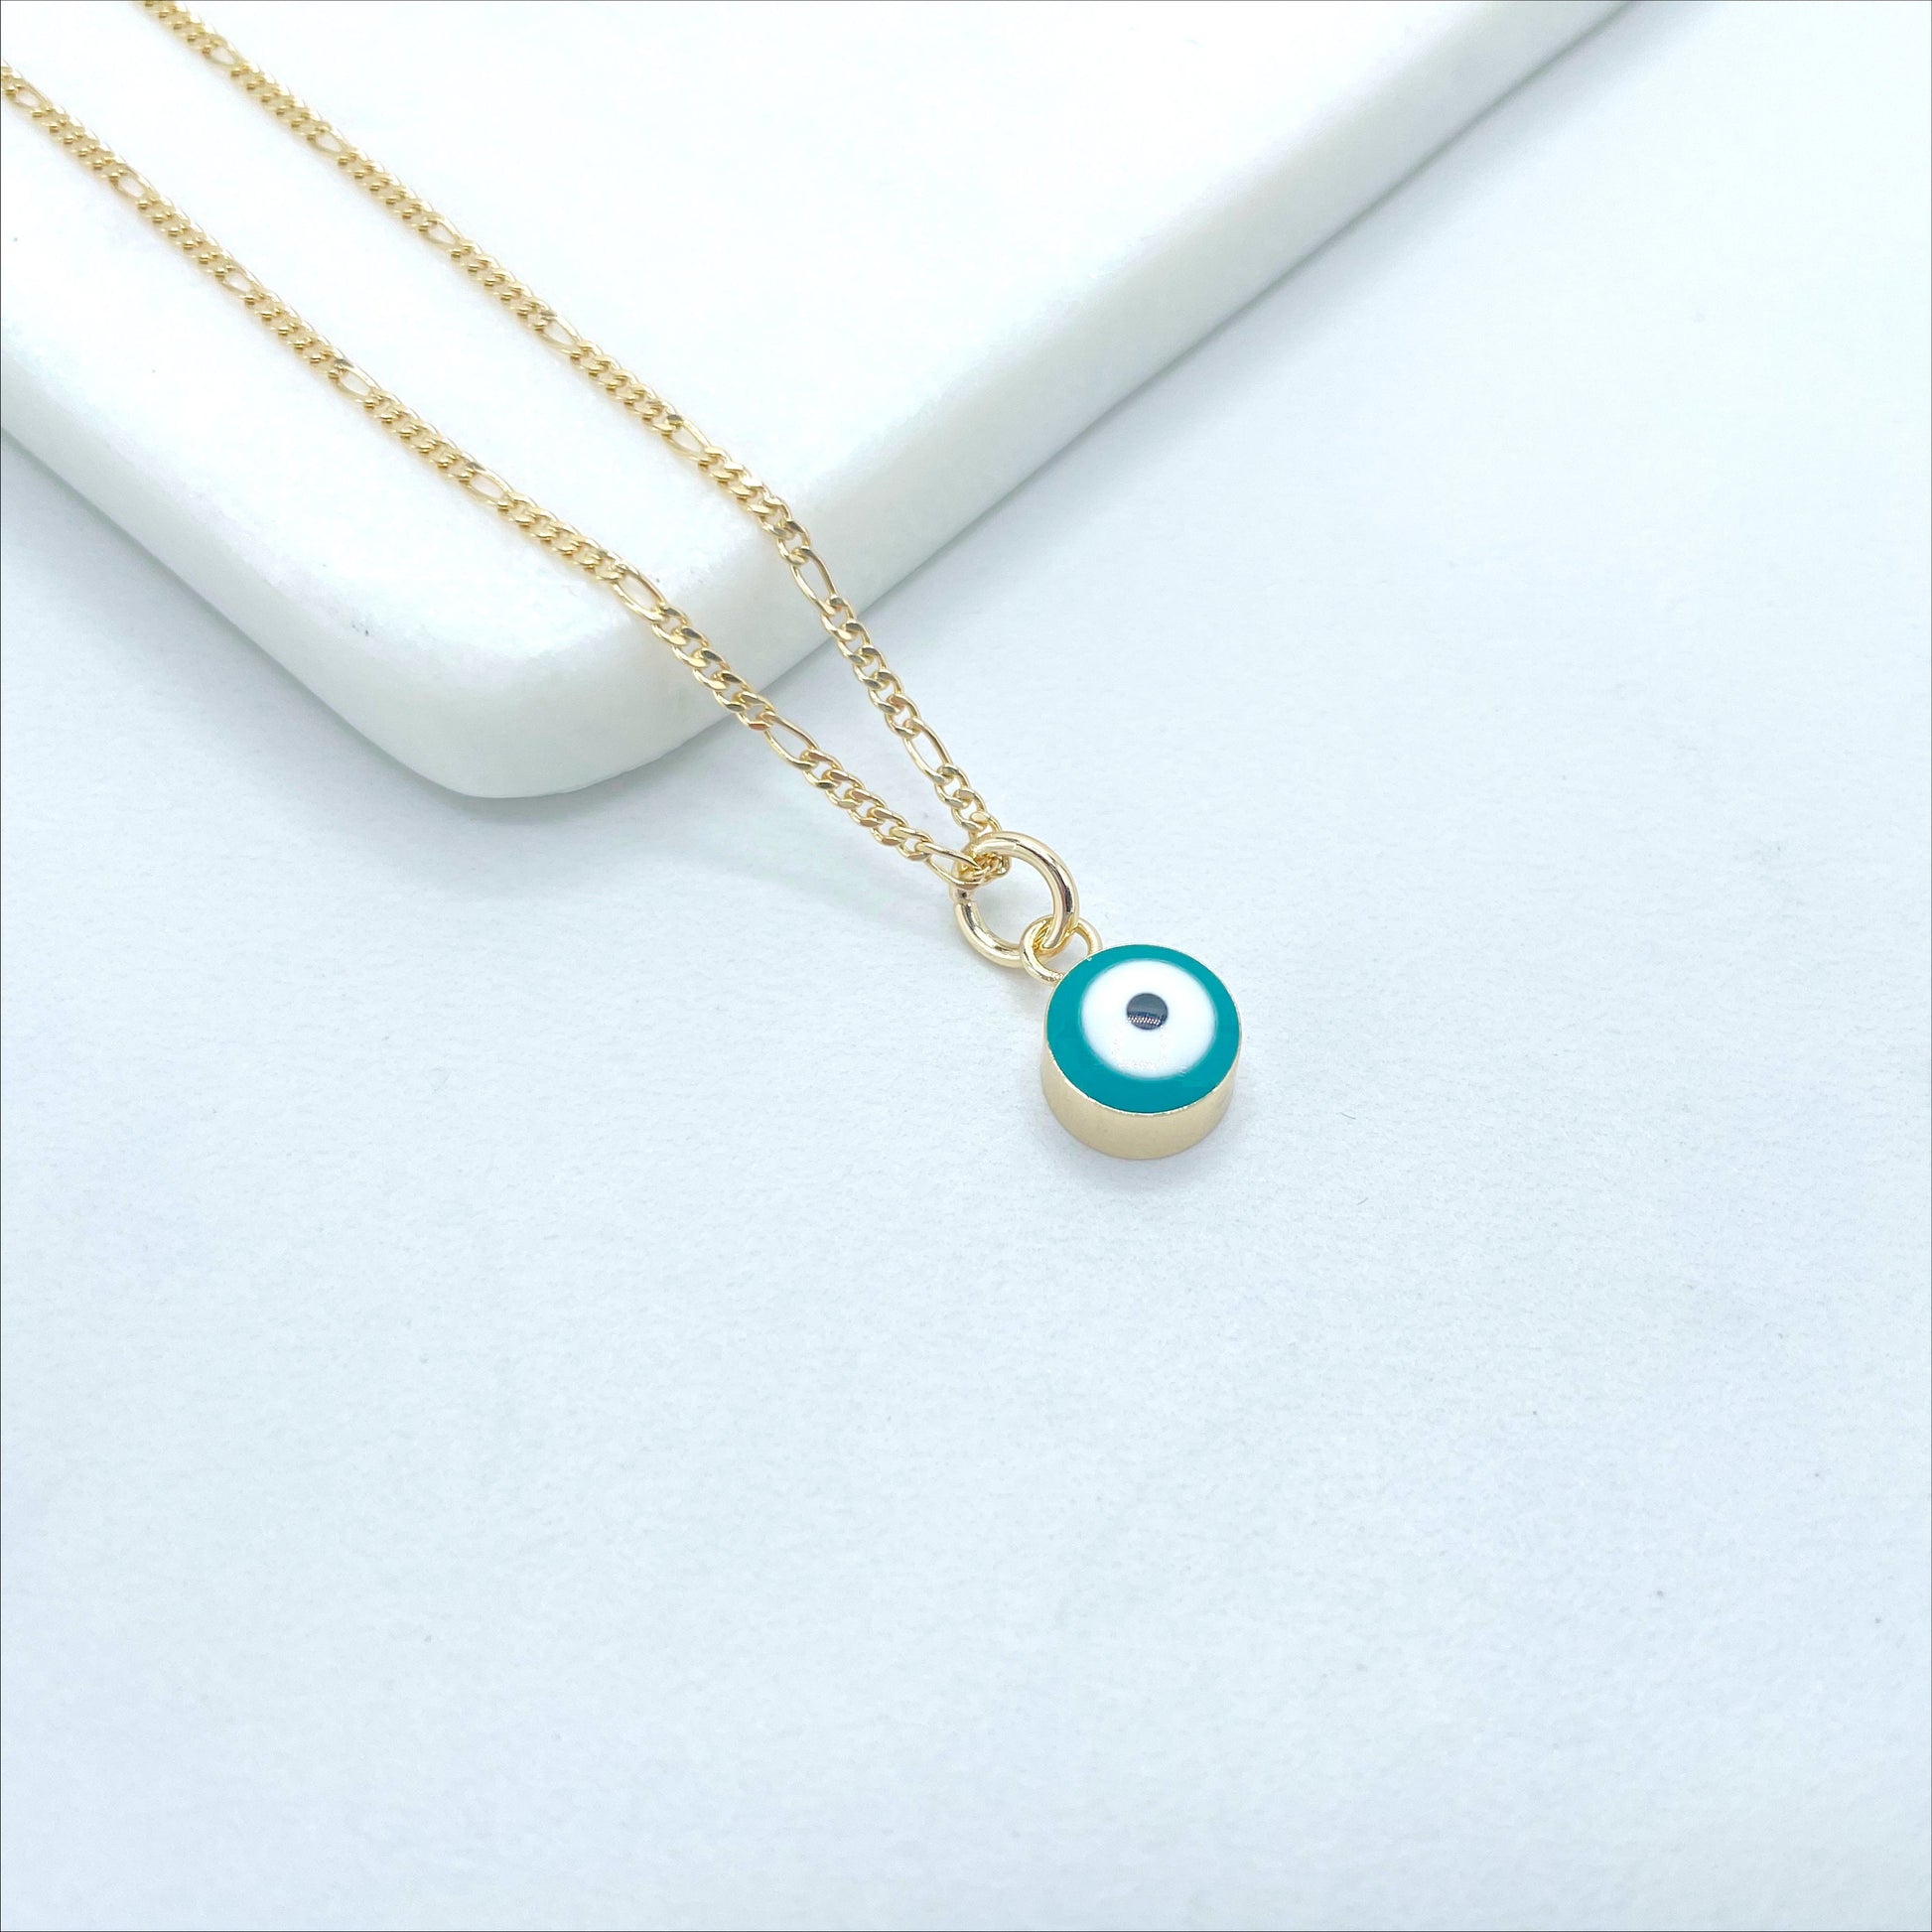 18k Gold Filled 1mm Figaro Link Dainty Chain, Teal Blue Greek Evil Eyes Earrings or Charm, Small or Medium, Wholesale Jewelry Supplies